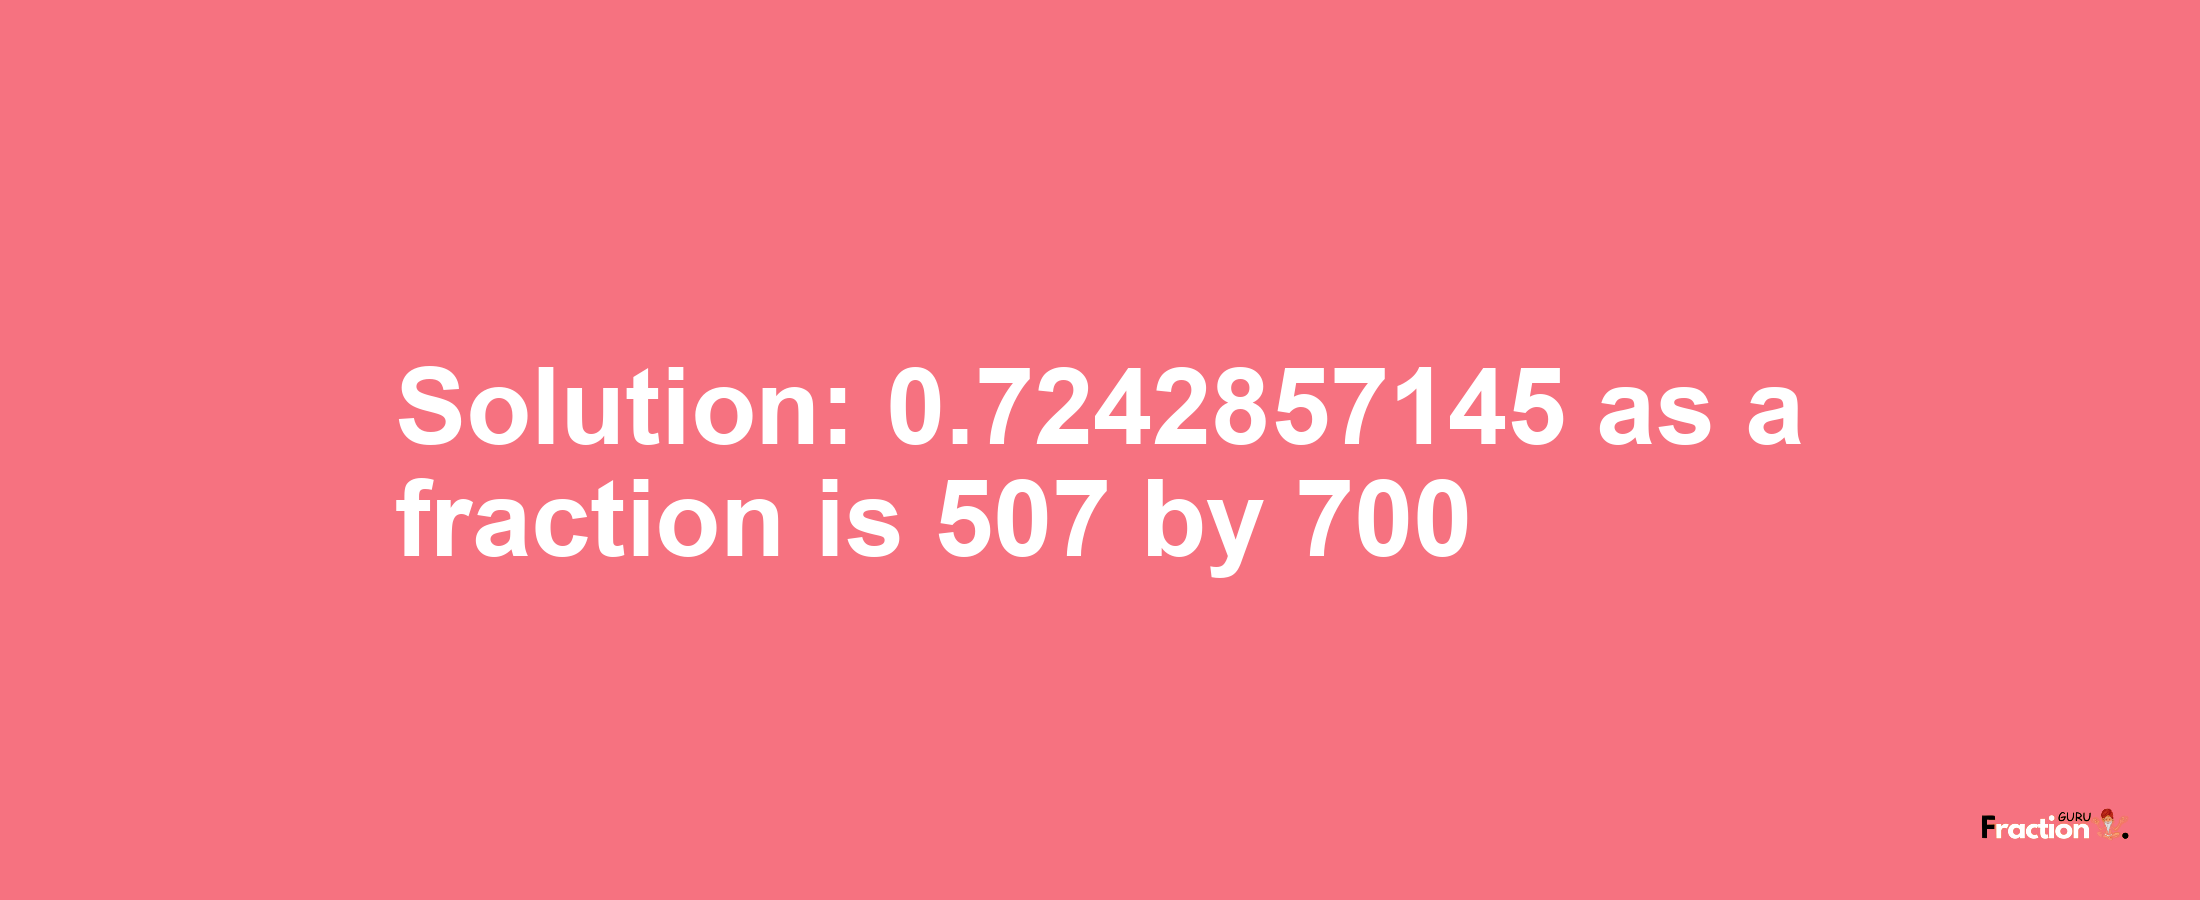 Solution:0.7242857145 as a fraction is 507/700